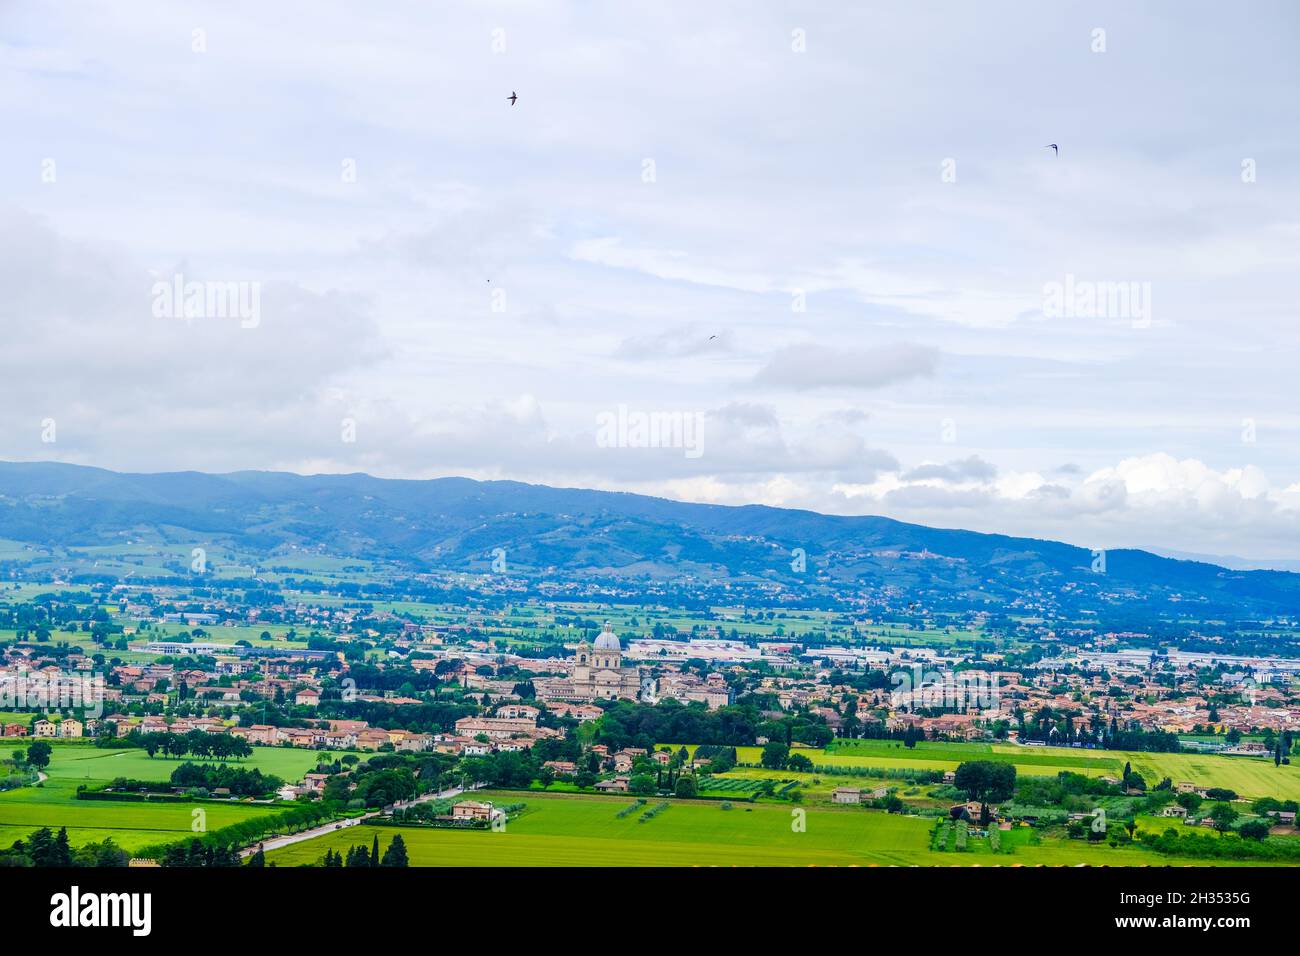 Looking towards the town of Assisi from the Basilica of San Francesco Assisi Stock Photo